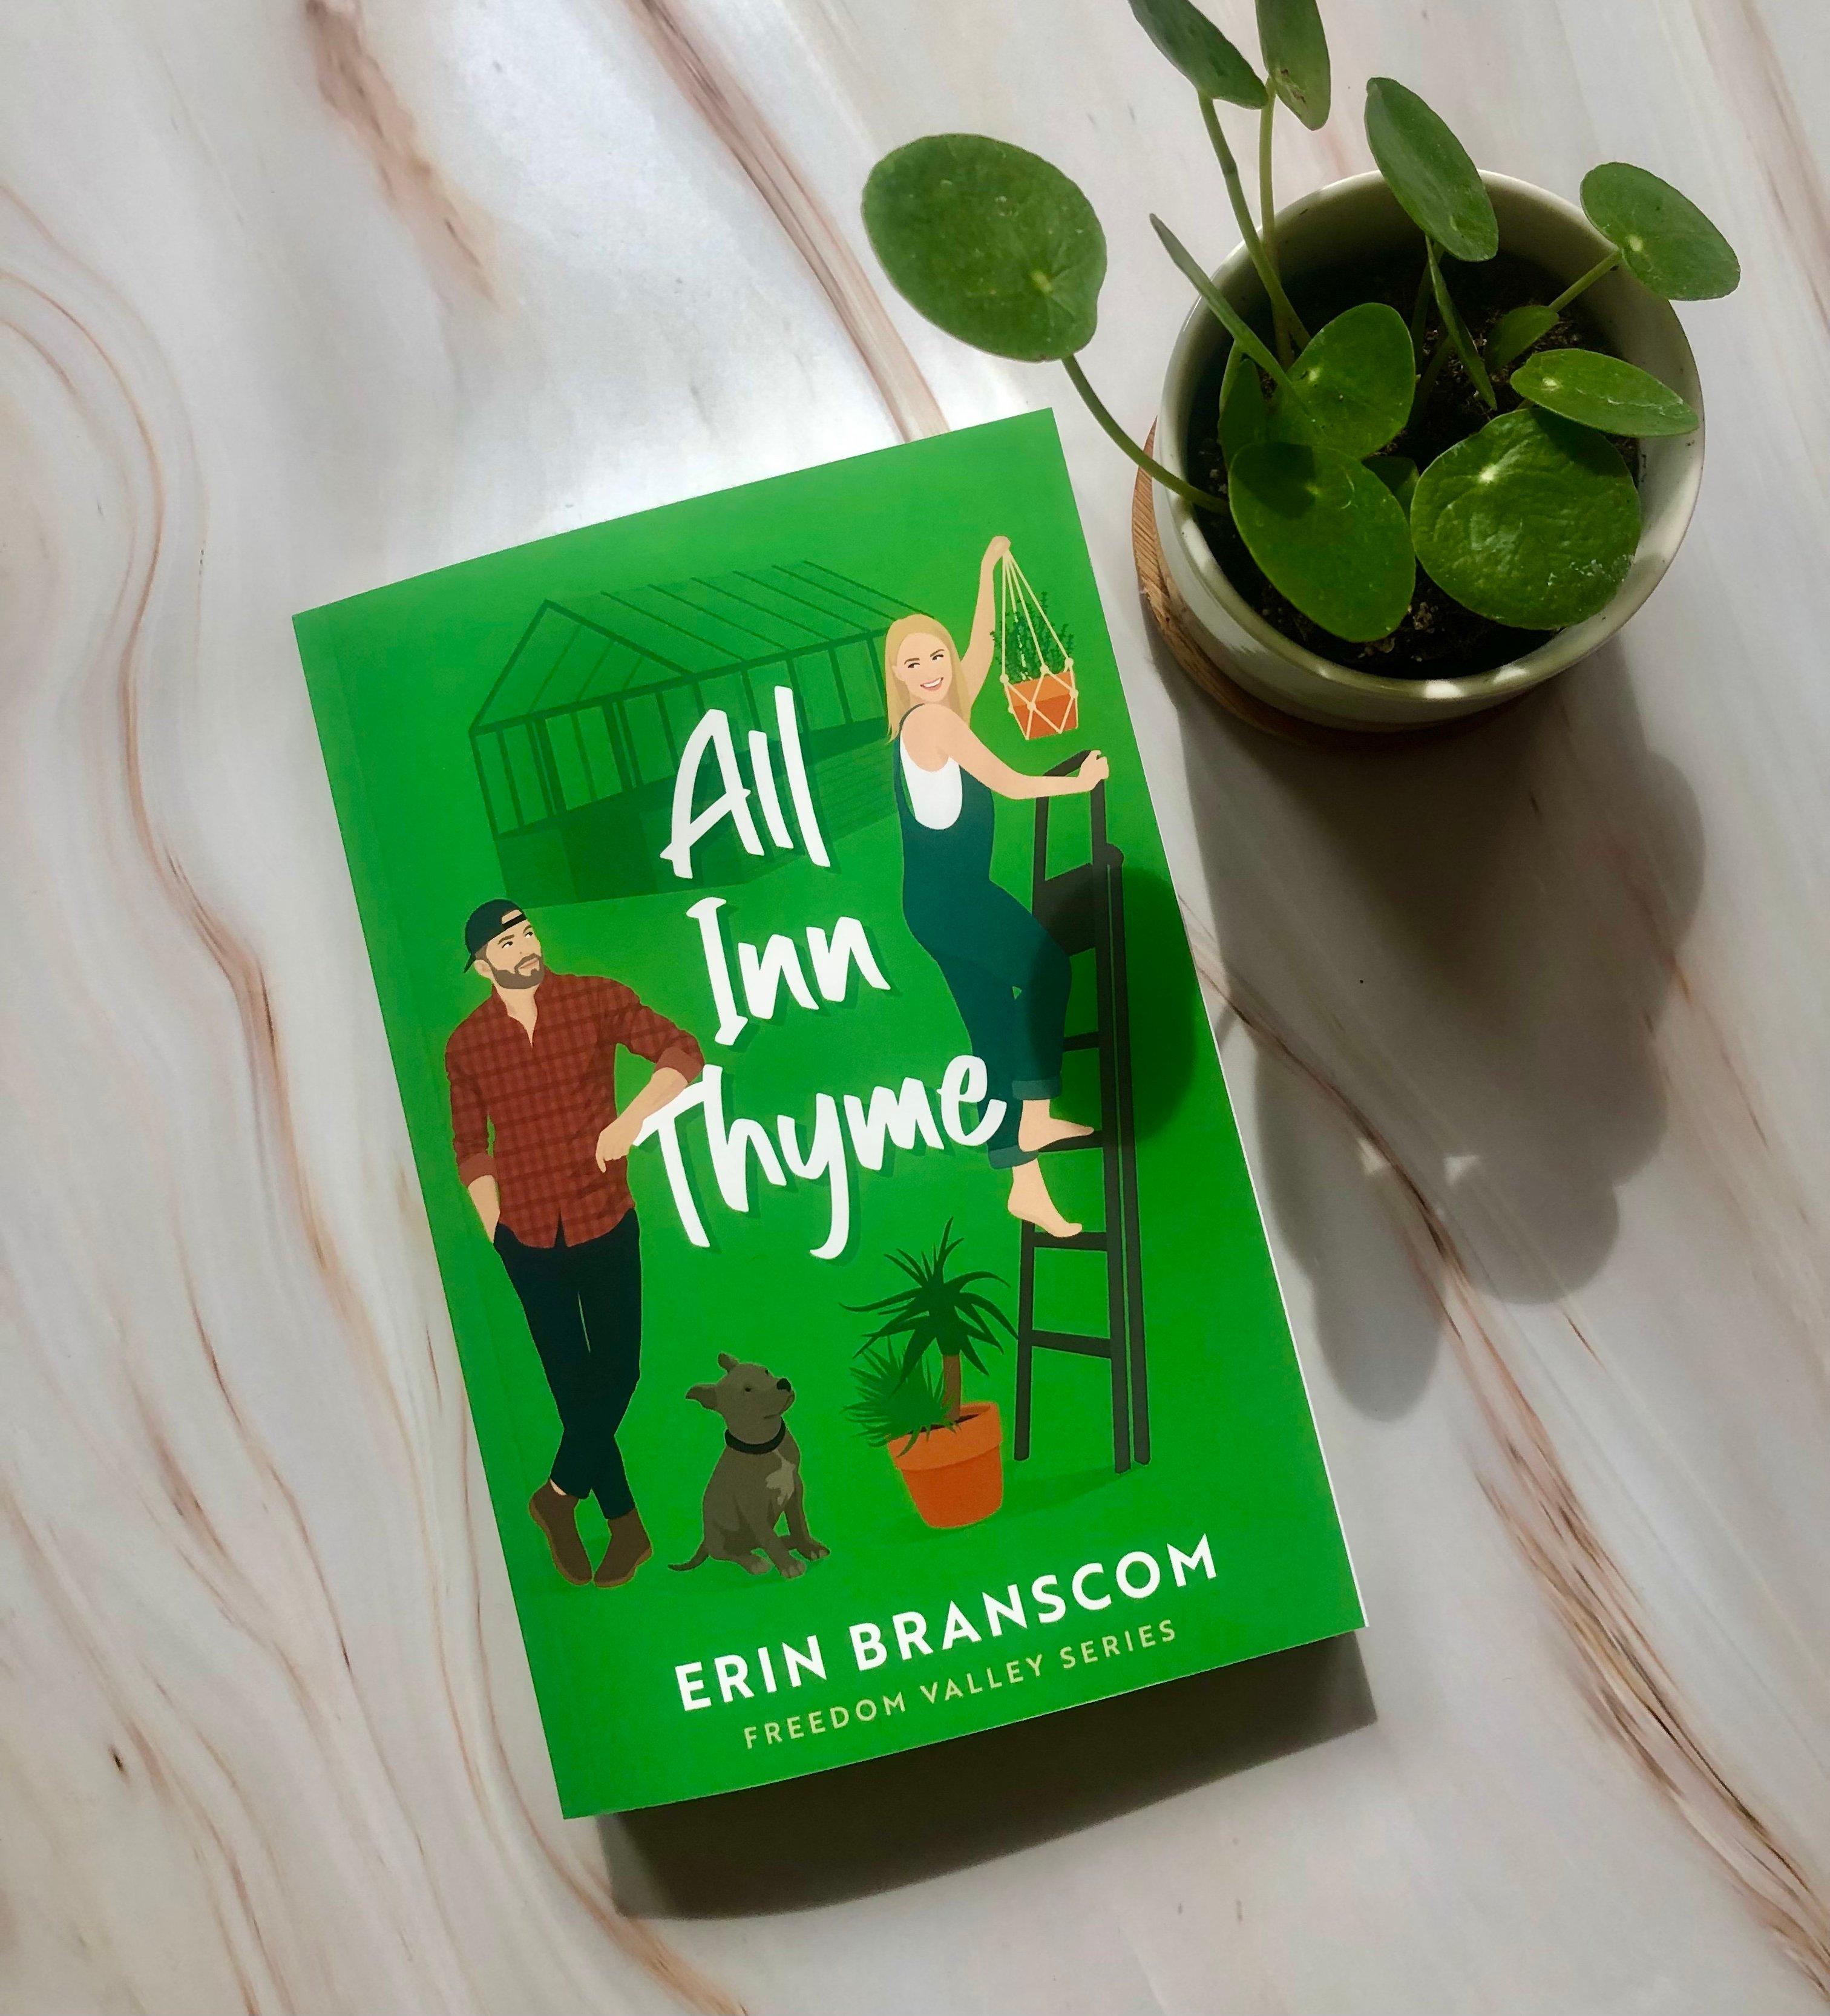 "All In Thyme" book cover